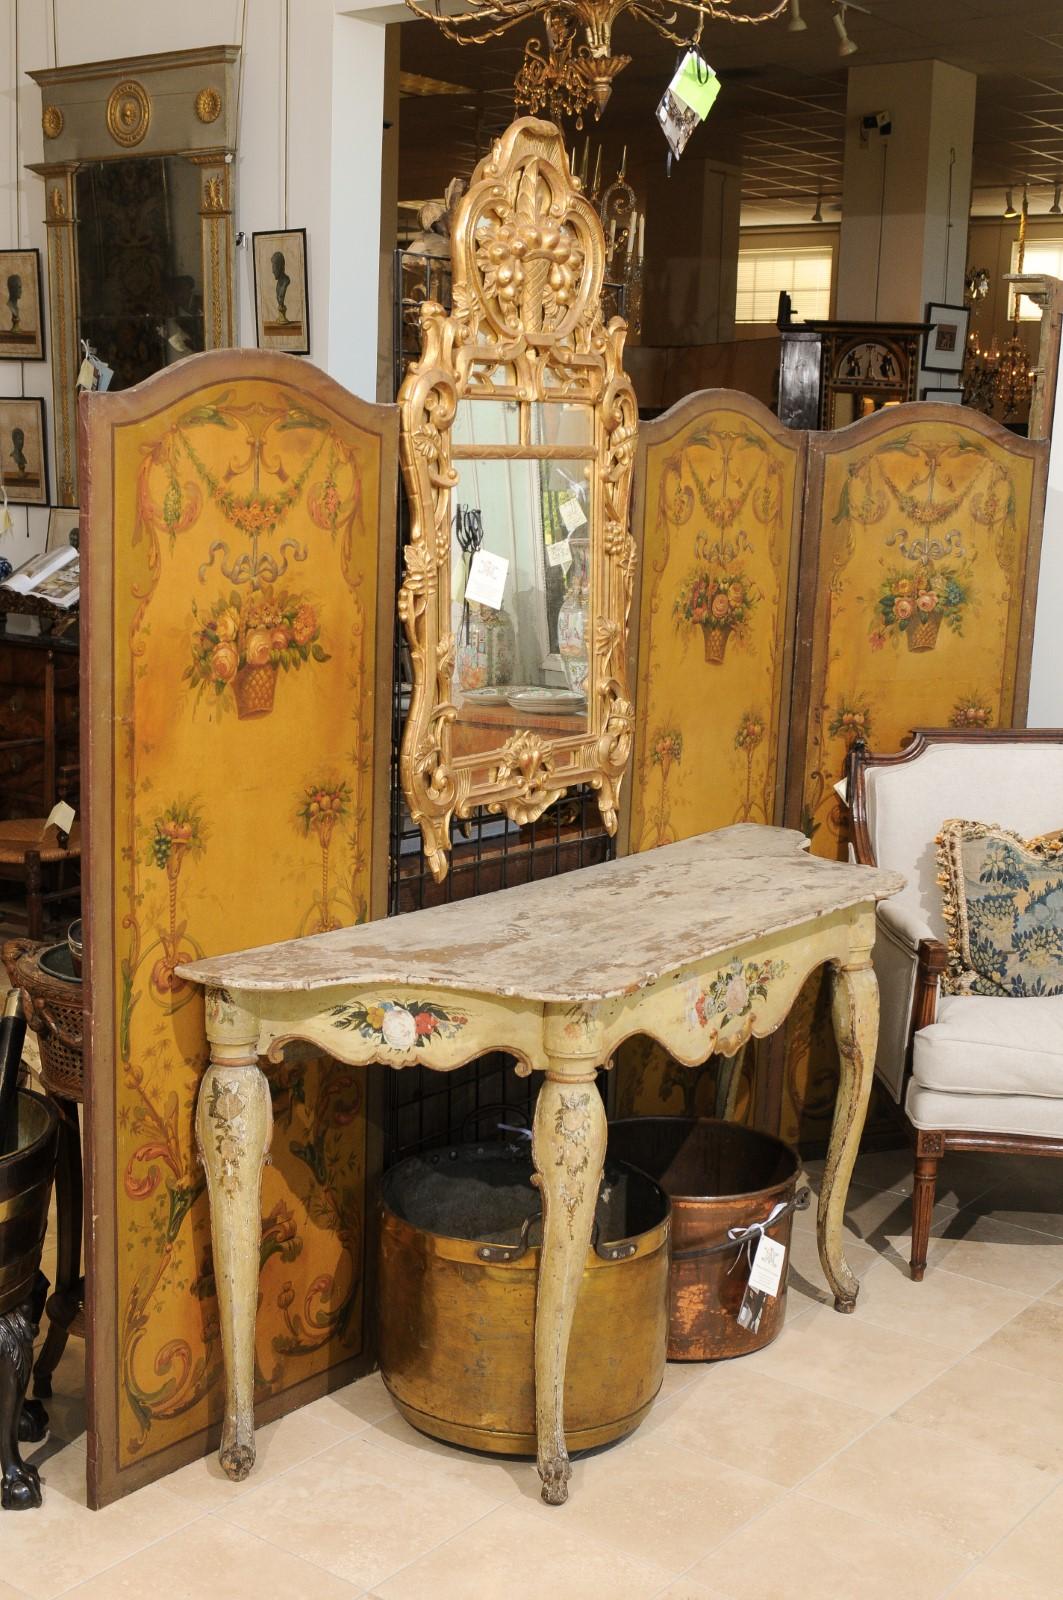 A mid-18th century Italian Rococo console table in a pale yellow painted finish with serpentine sided top, floral decoration on shaped apron and cabriole legs ending in hoofed feet.